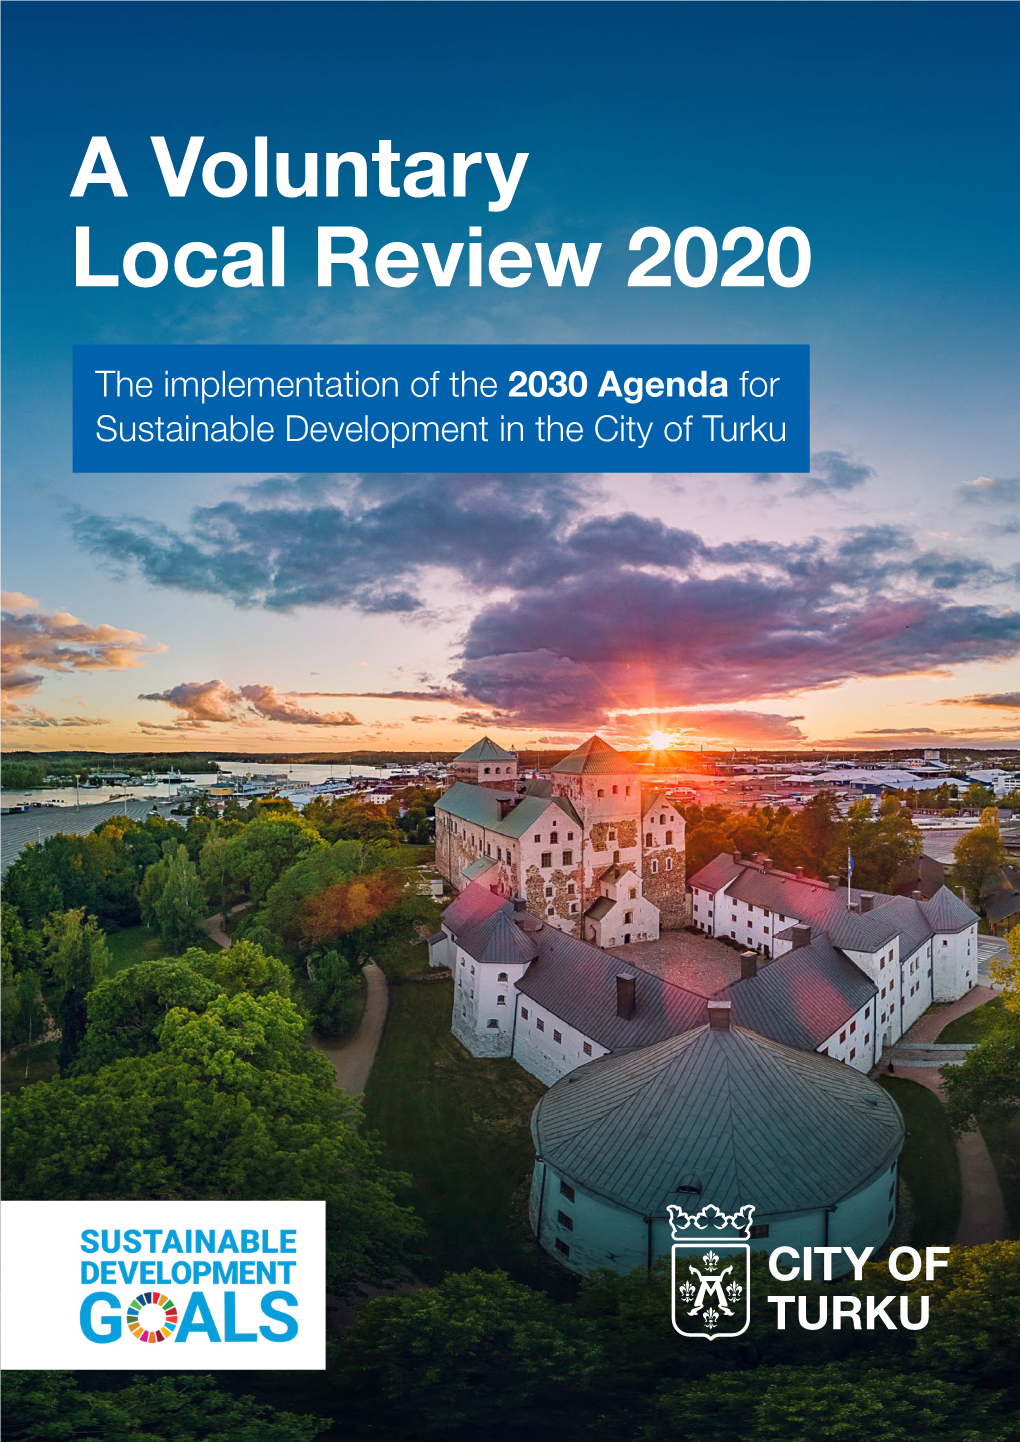 A Voluntary Local Review 2020 Turku